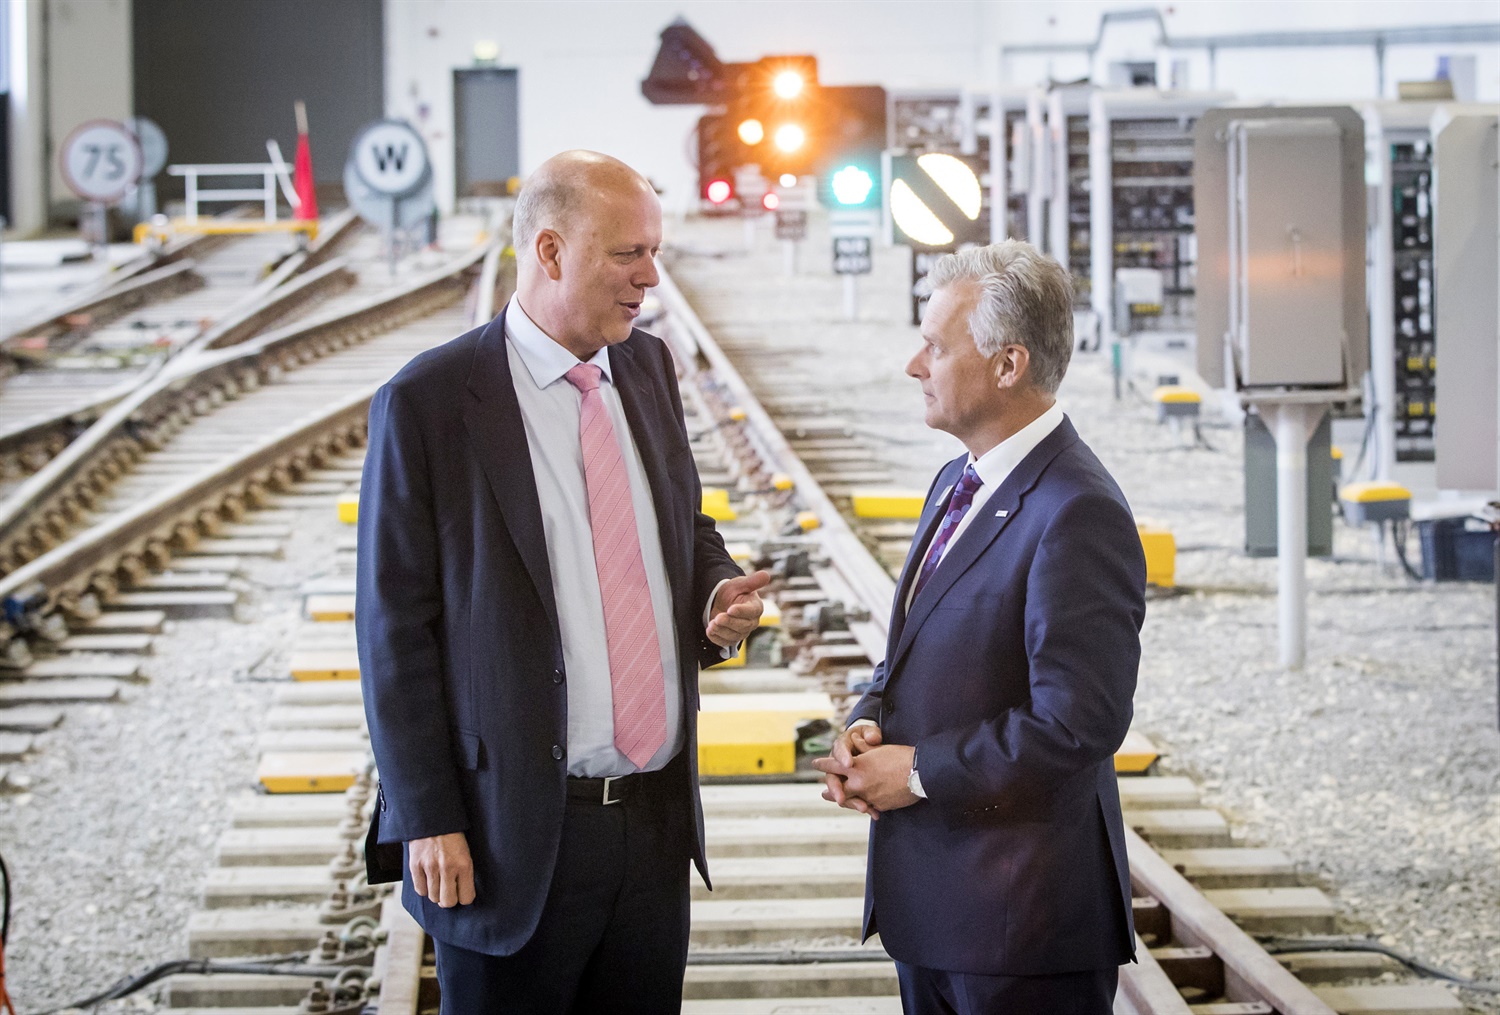 Digital Railway strategy sets out major upgrade targets for next 15 years  